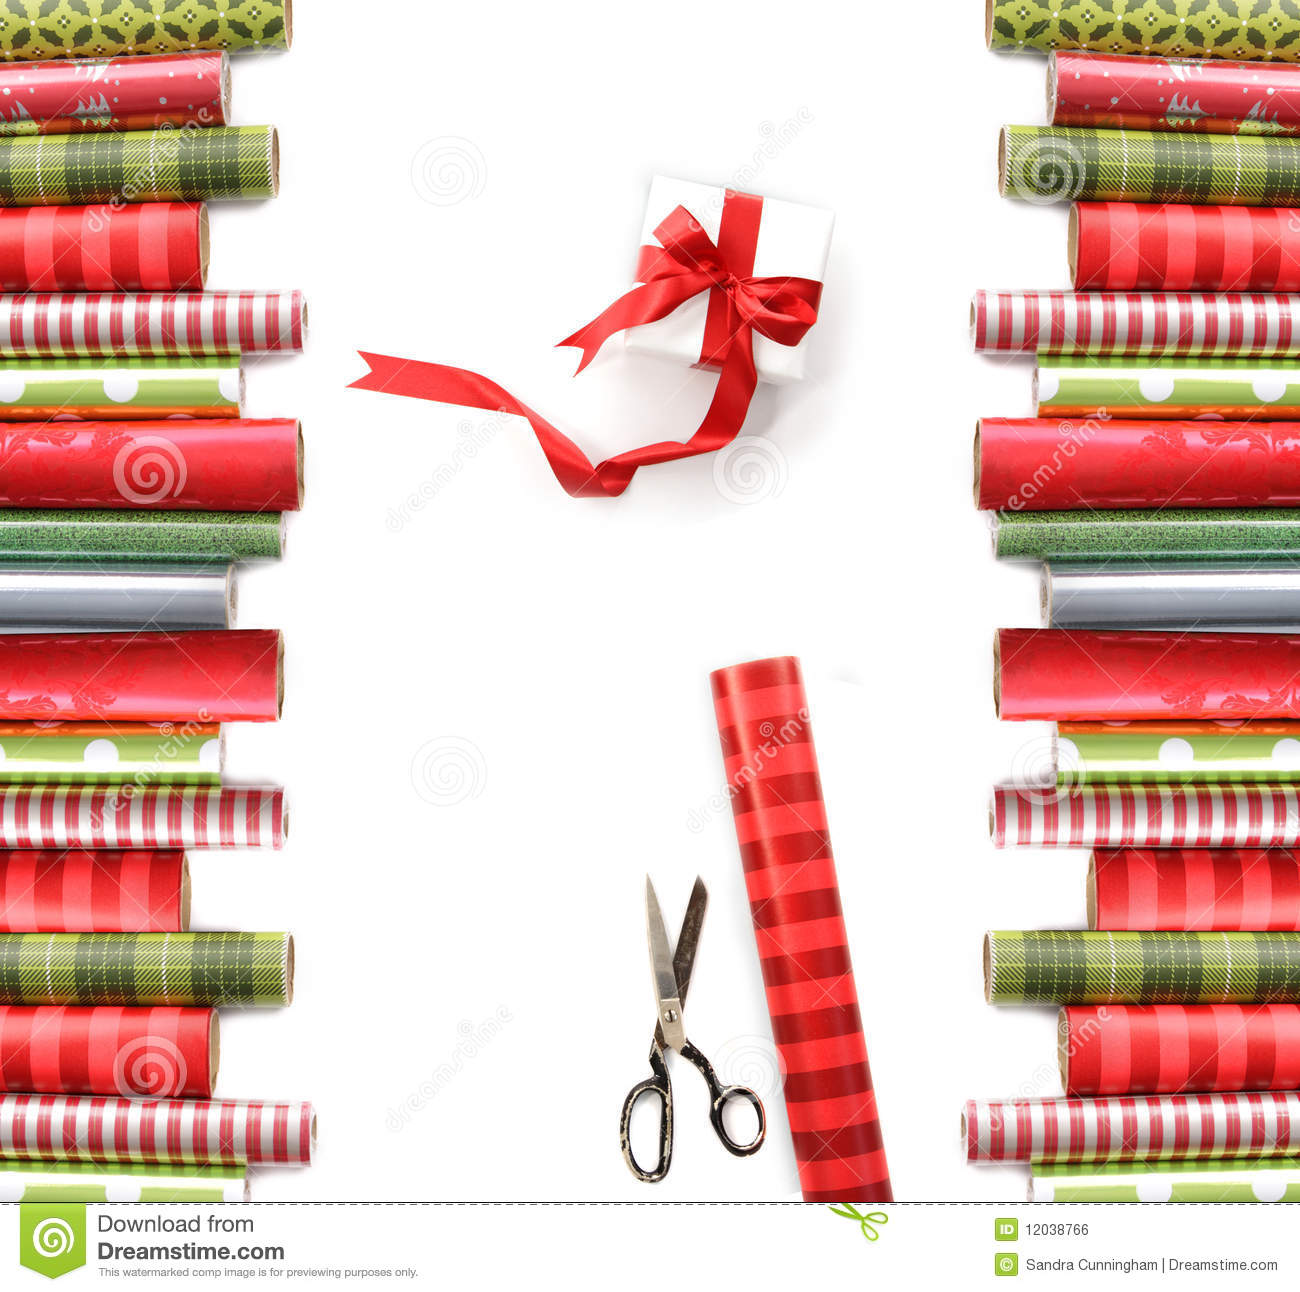 Wrapping paper clipart.